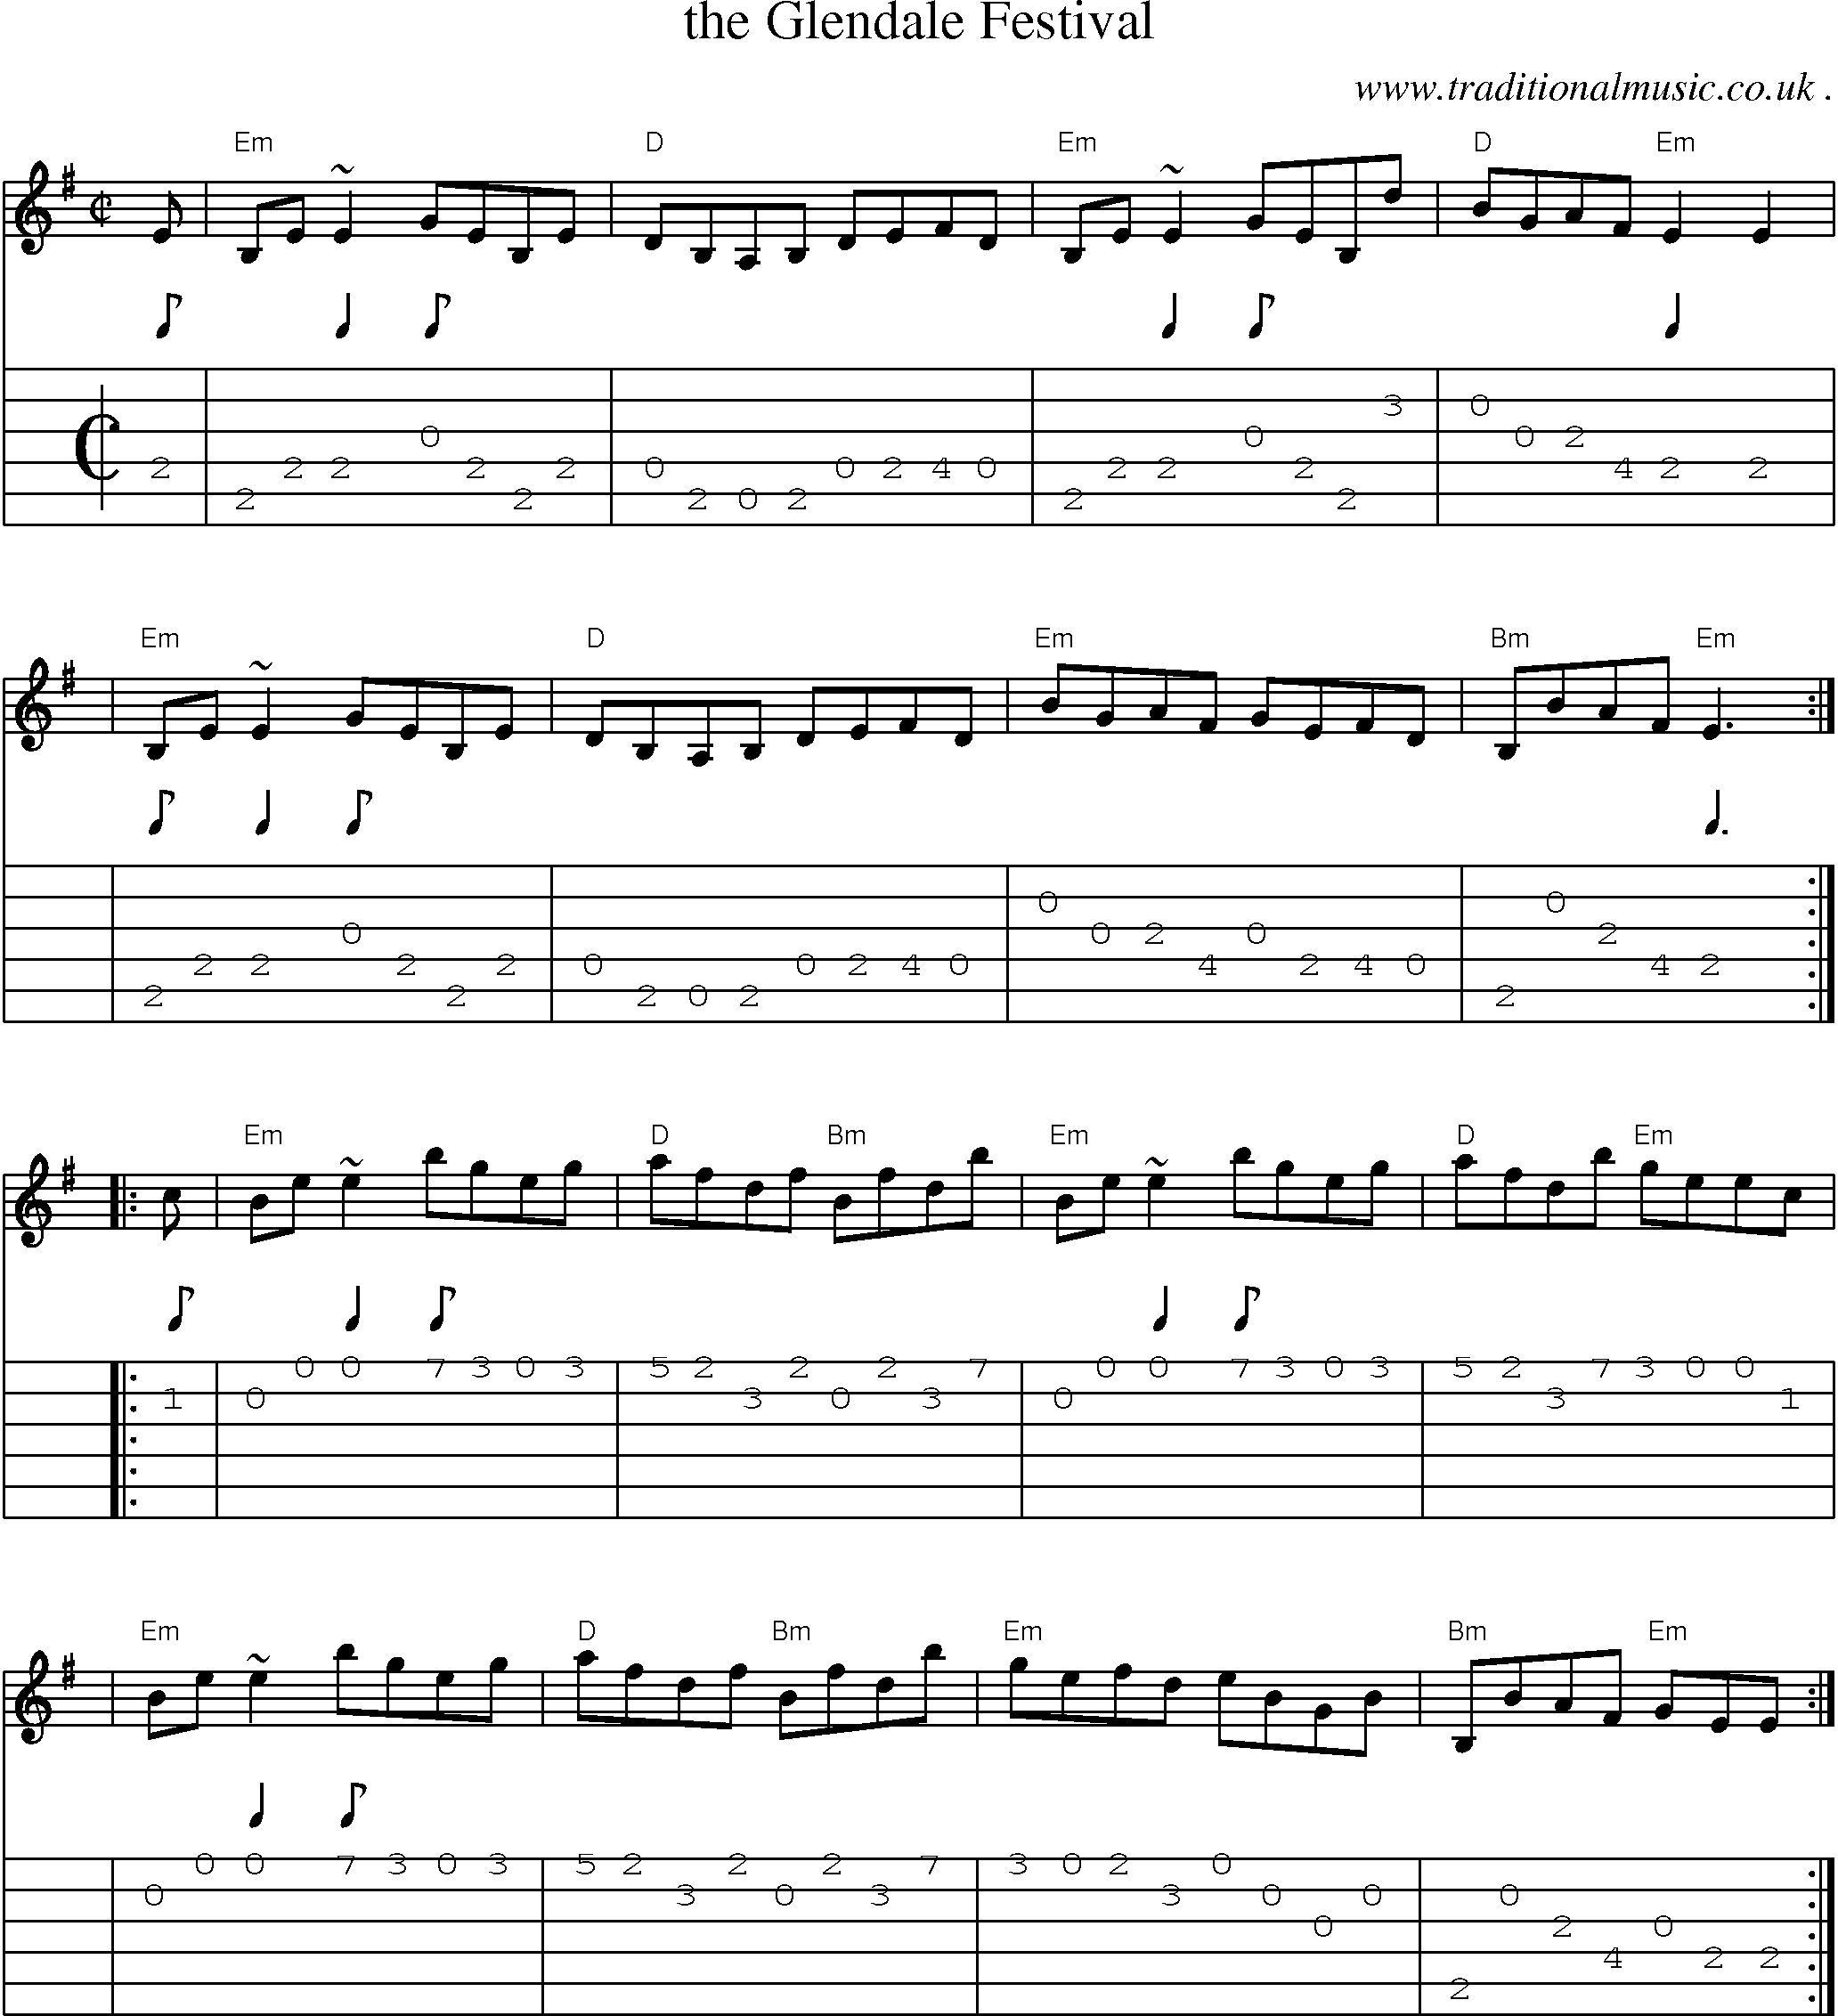 Sheet-music  score, Chords and Guitar Tabs for The Glendale Festival